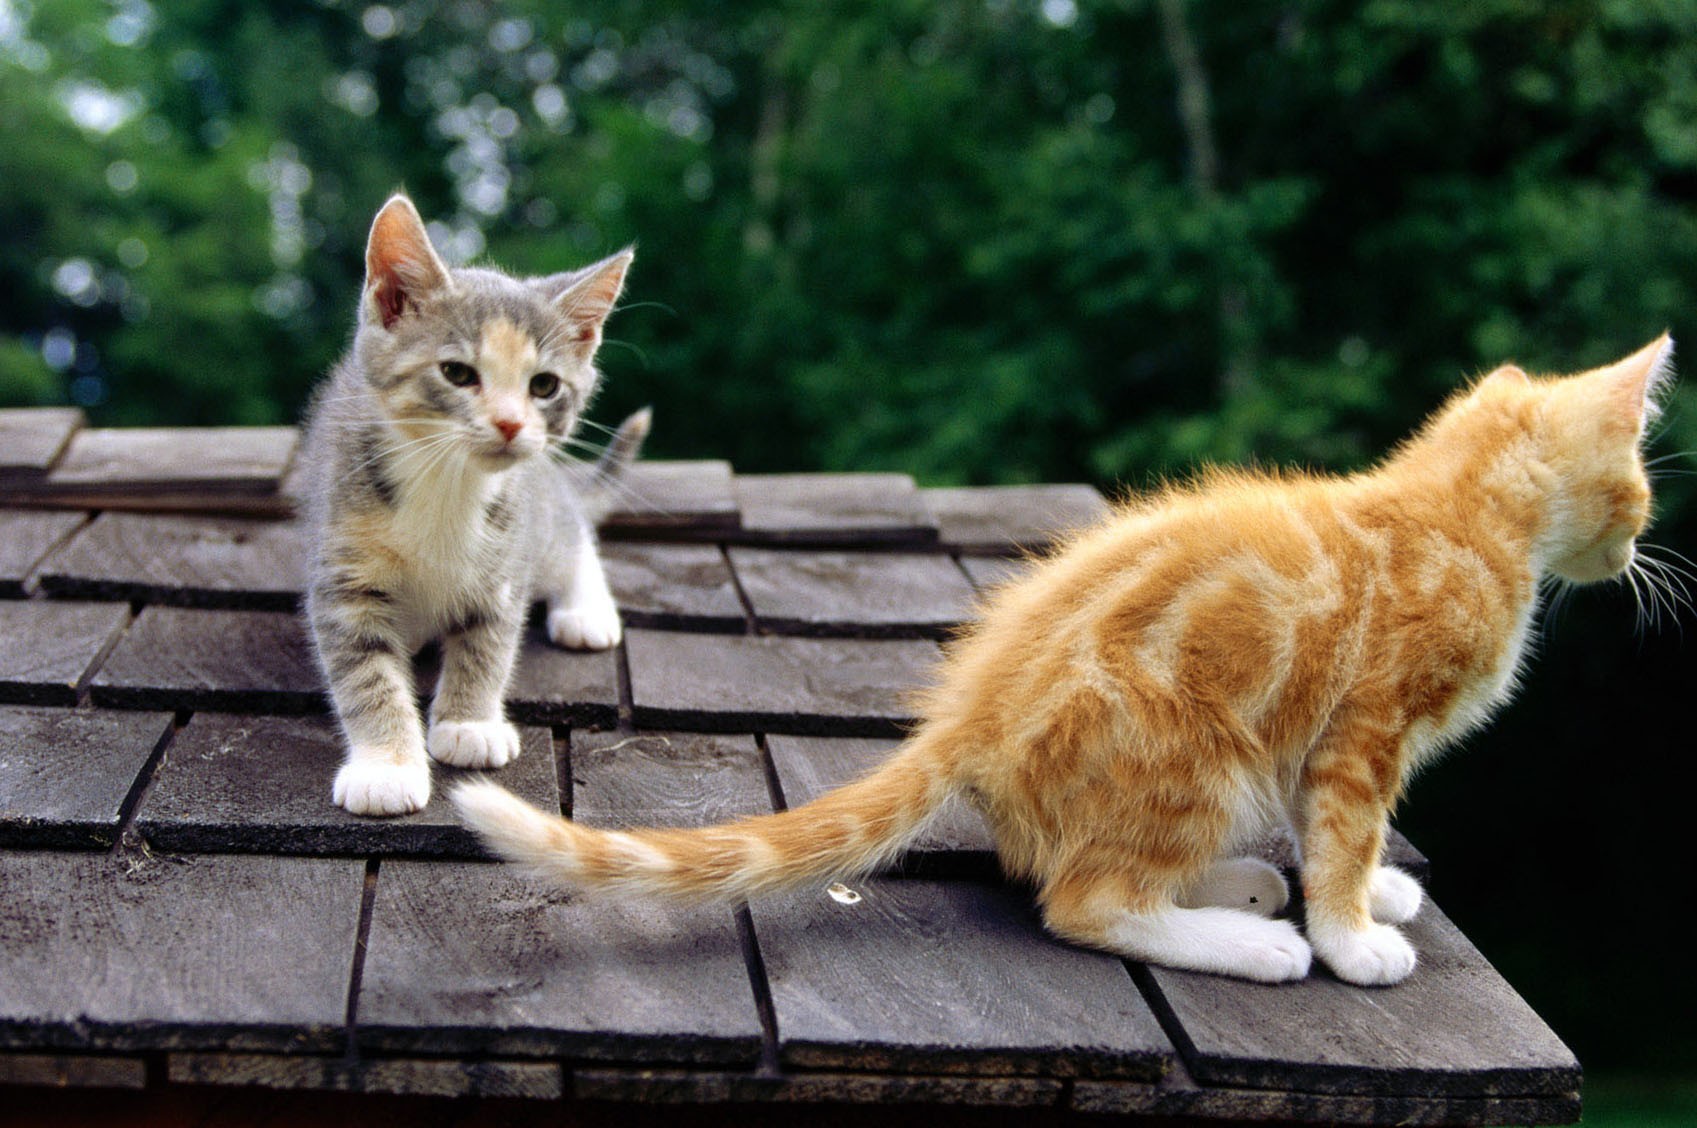 Kittens, Kitty, Cat Eye, Cute Cat Wallpapers, Cute - There Are Cats On The Roof - HD Wallpaper 